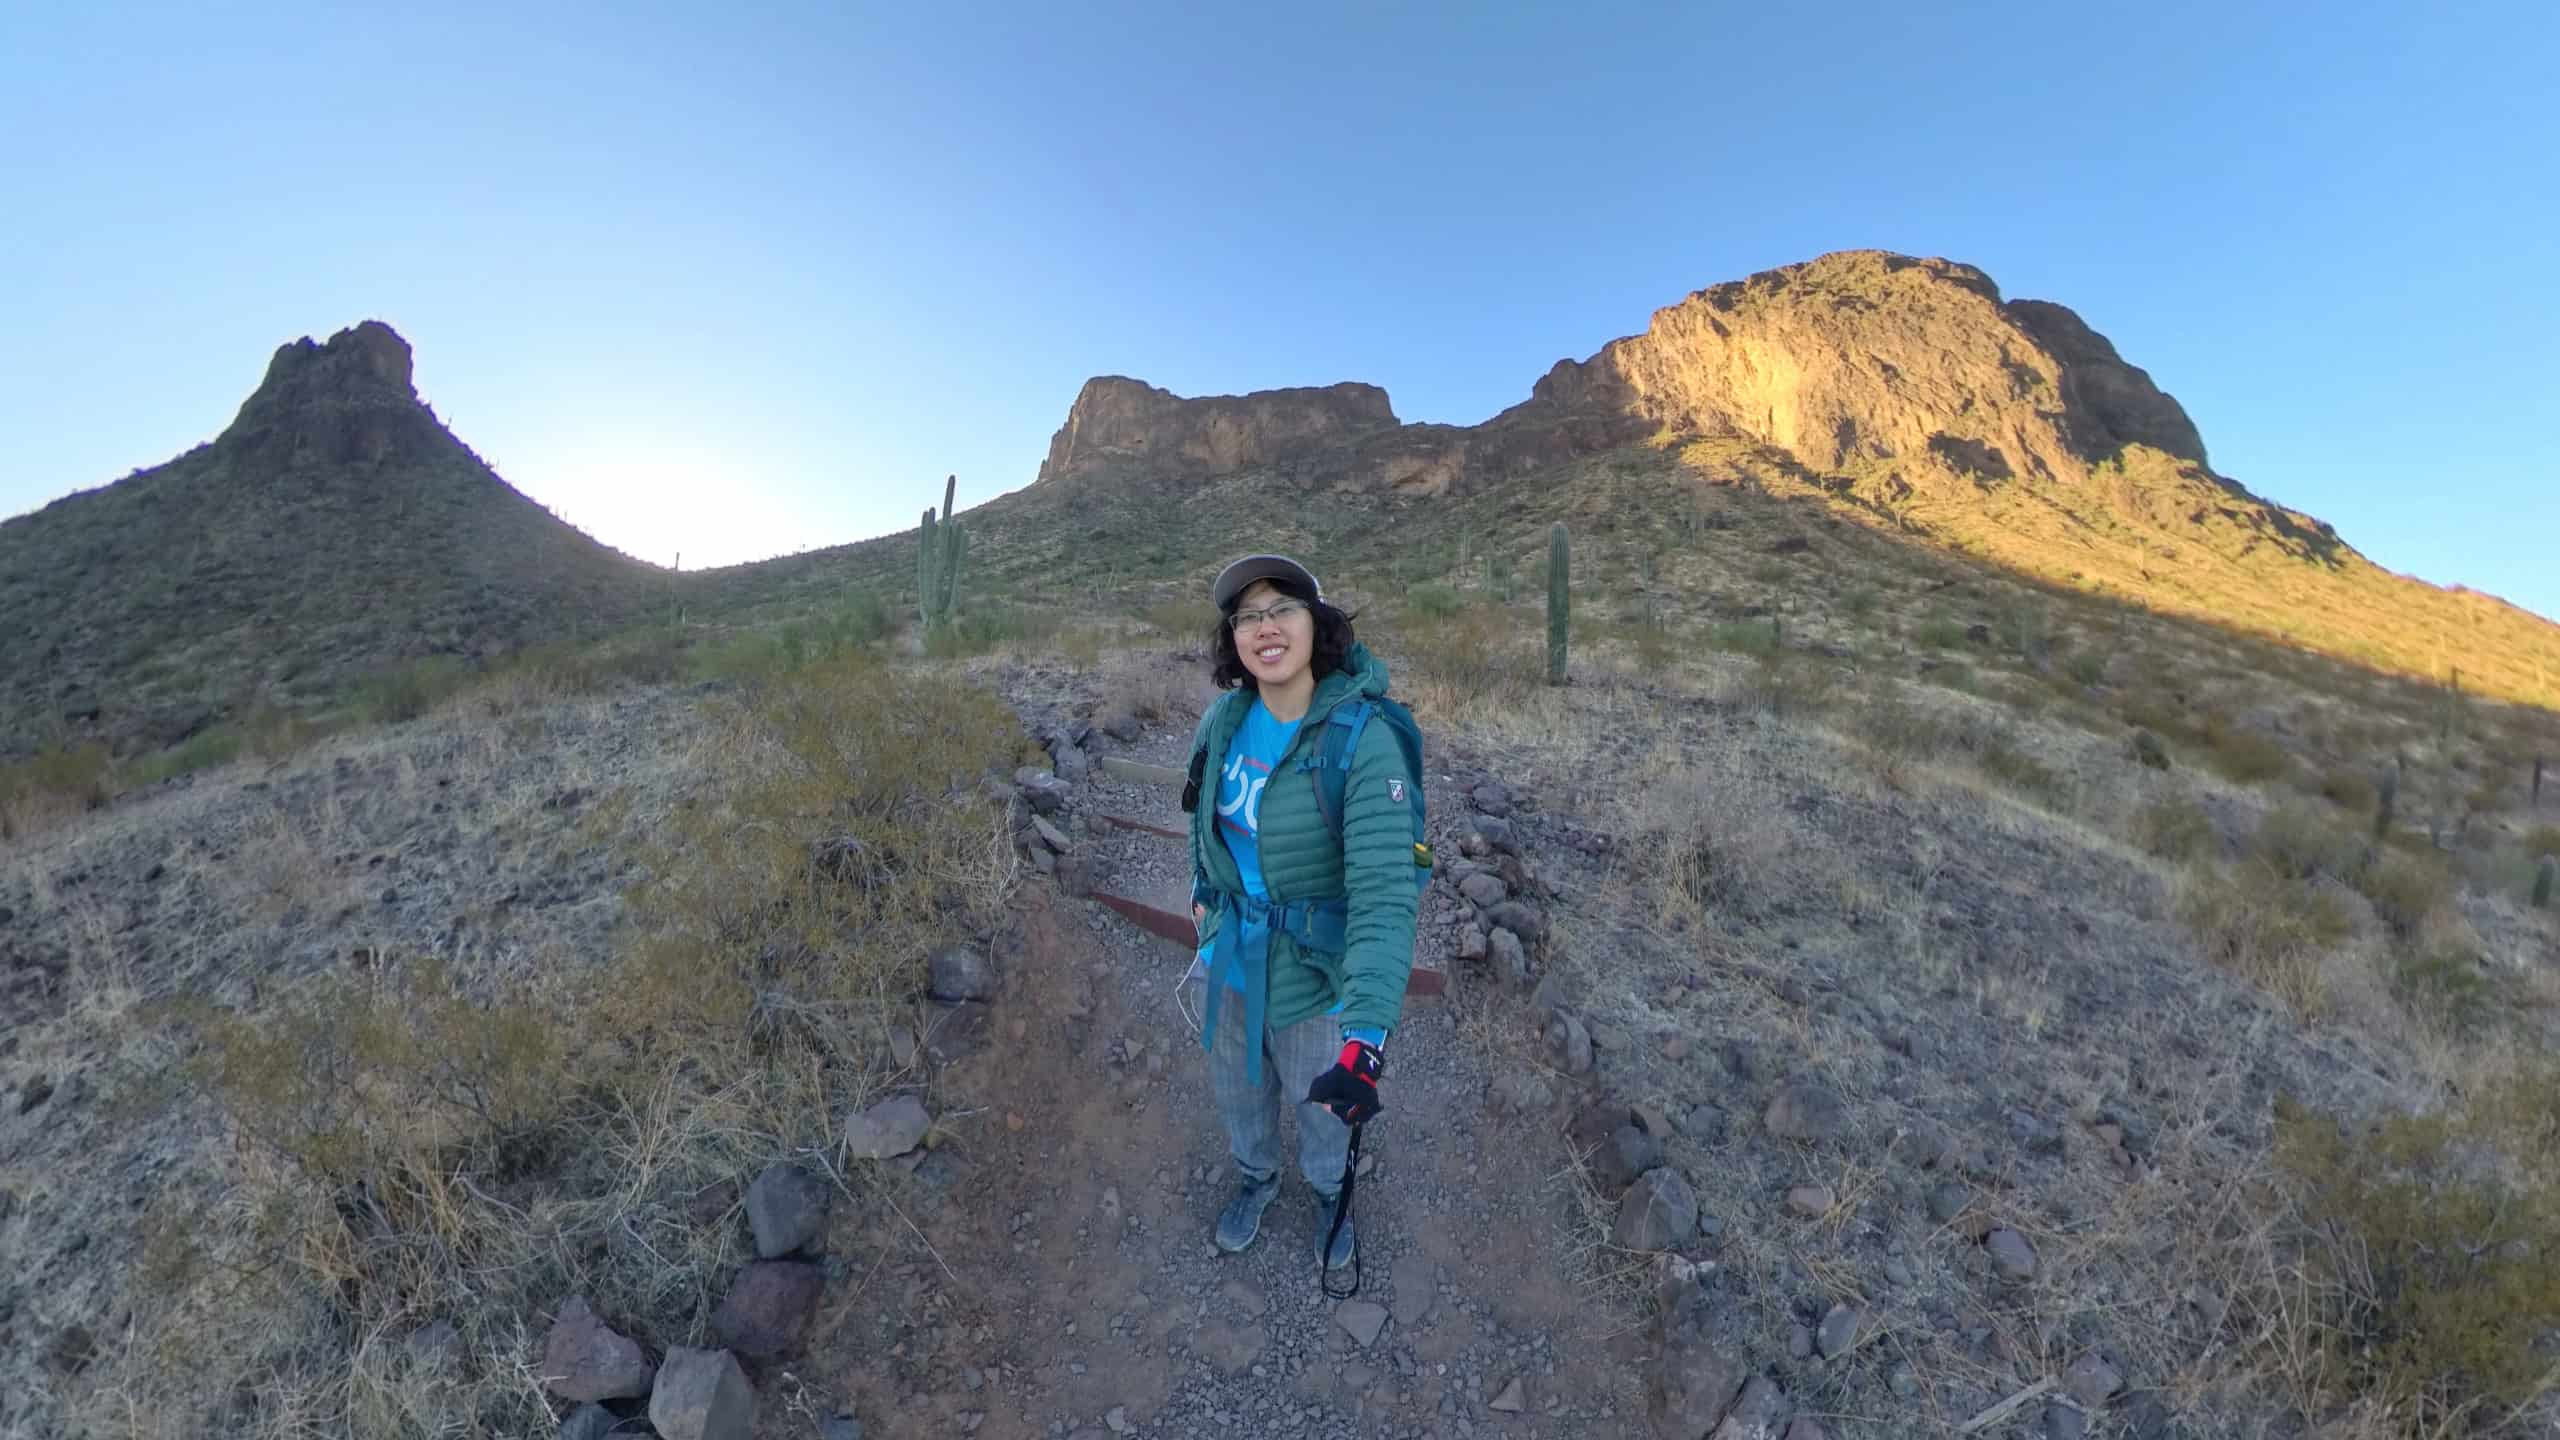 Meggie is wear a blue shirt that says "OCD" and has on red and black gloves. She is wearing a blue backpack and ballcap. She is at the base of the mountains. Behind her is the vast brown desert and cactus and a clear blue sky. She is in Picacho Peak State Park between Tucson and Phoenix, Arizona, United States.